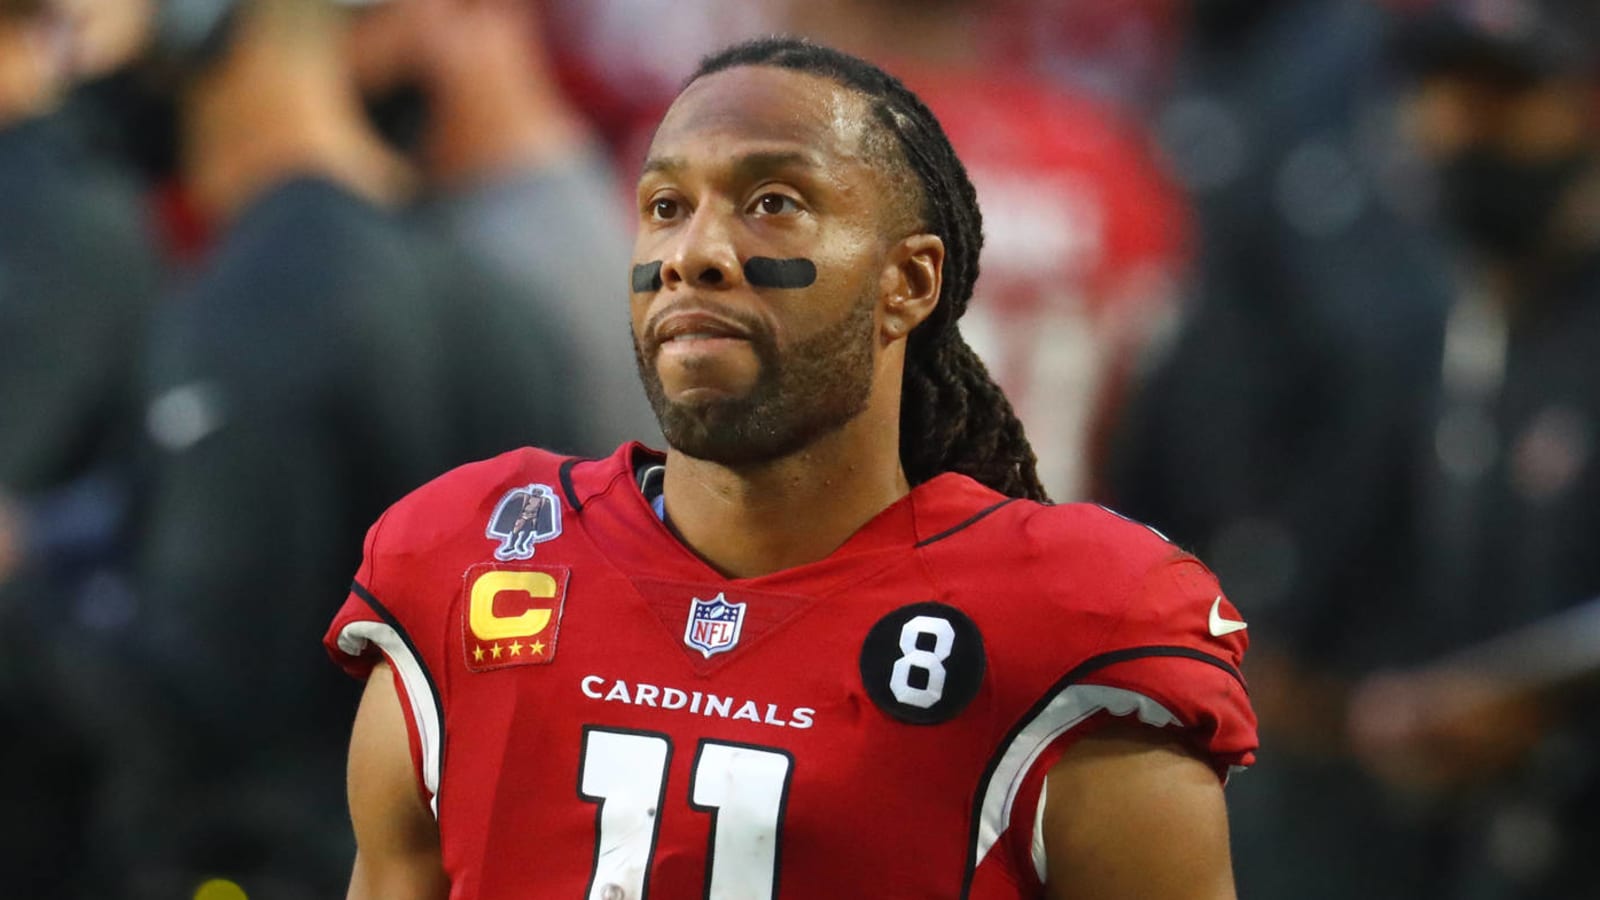 Free agency not deadline for Larry Fitzgerald decision